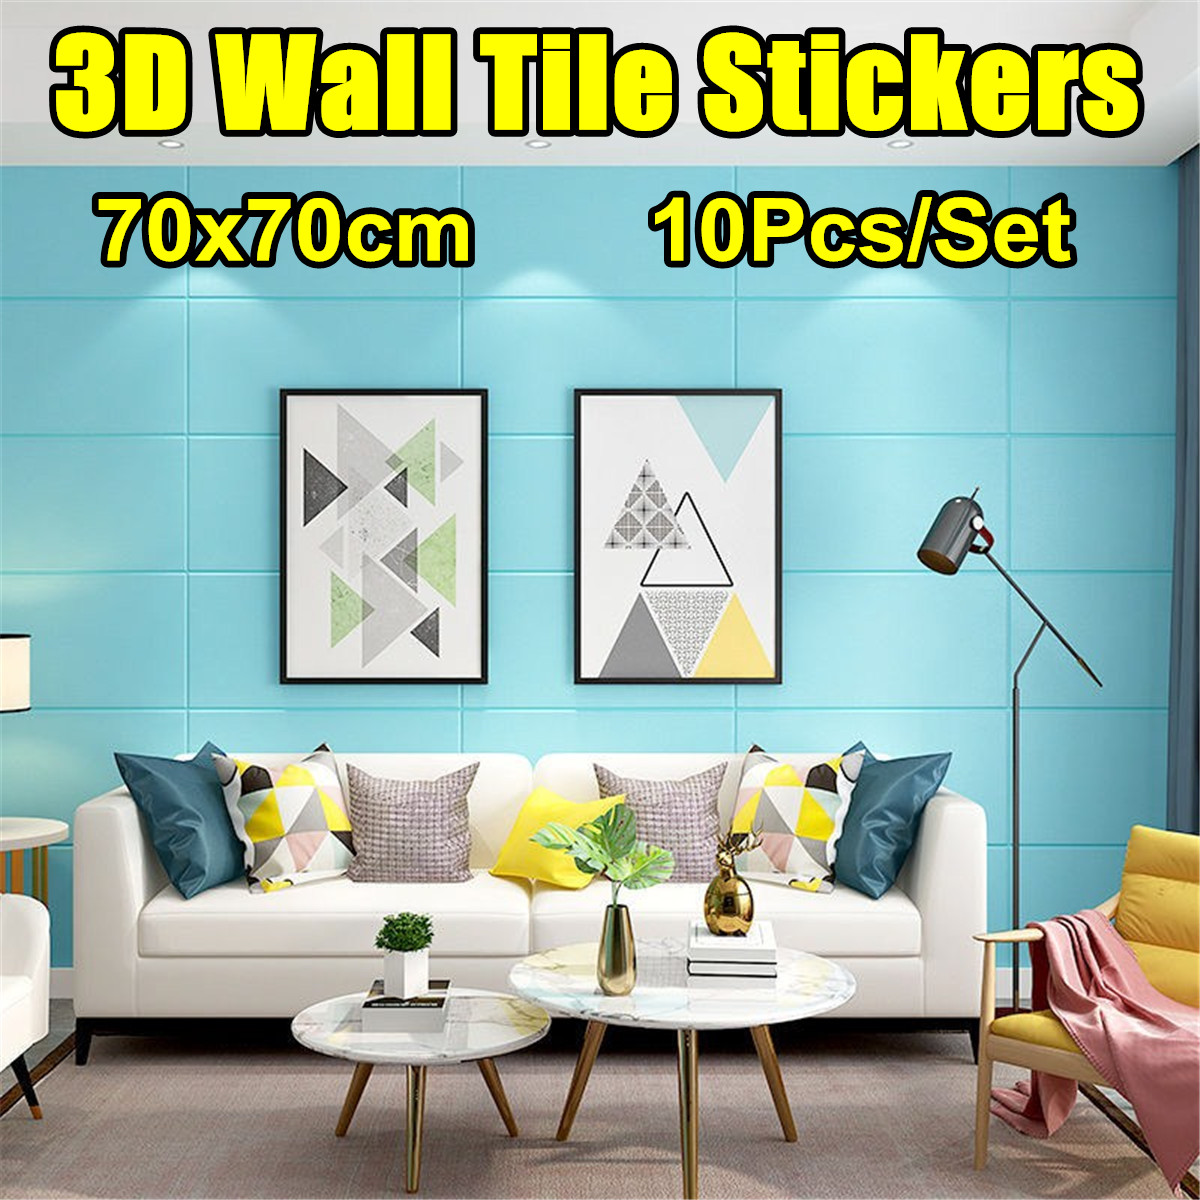 10PcsSet-70x70cm-3D-Wall-Tile-Stickers-Kitchen-Bathroom-Self-Adhesive-Decals-1840530-1